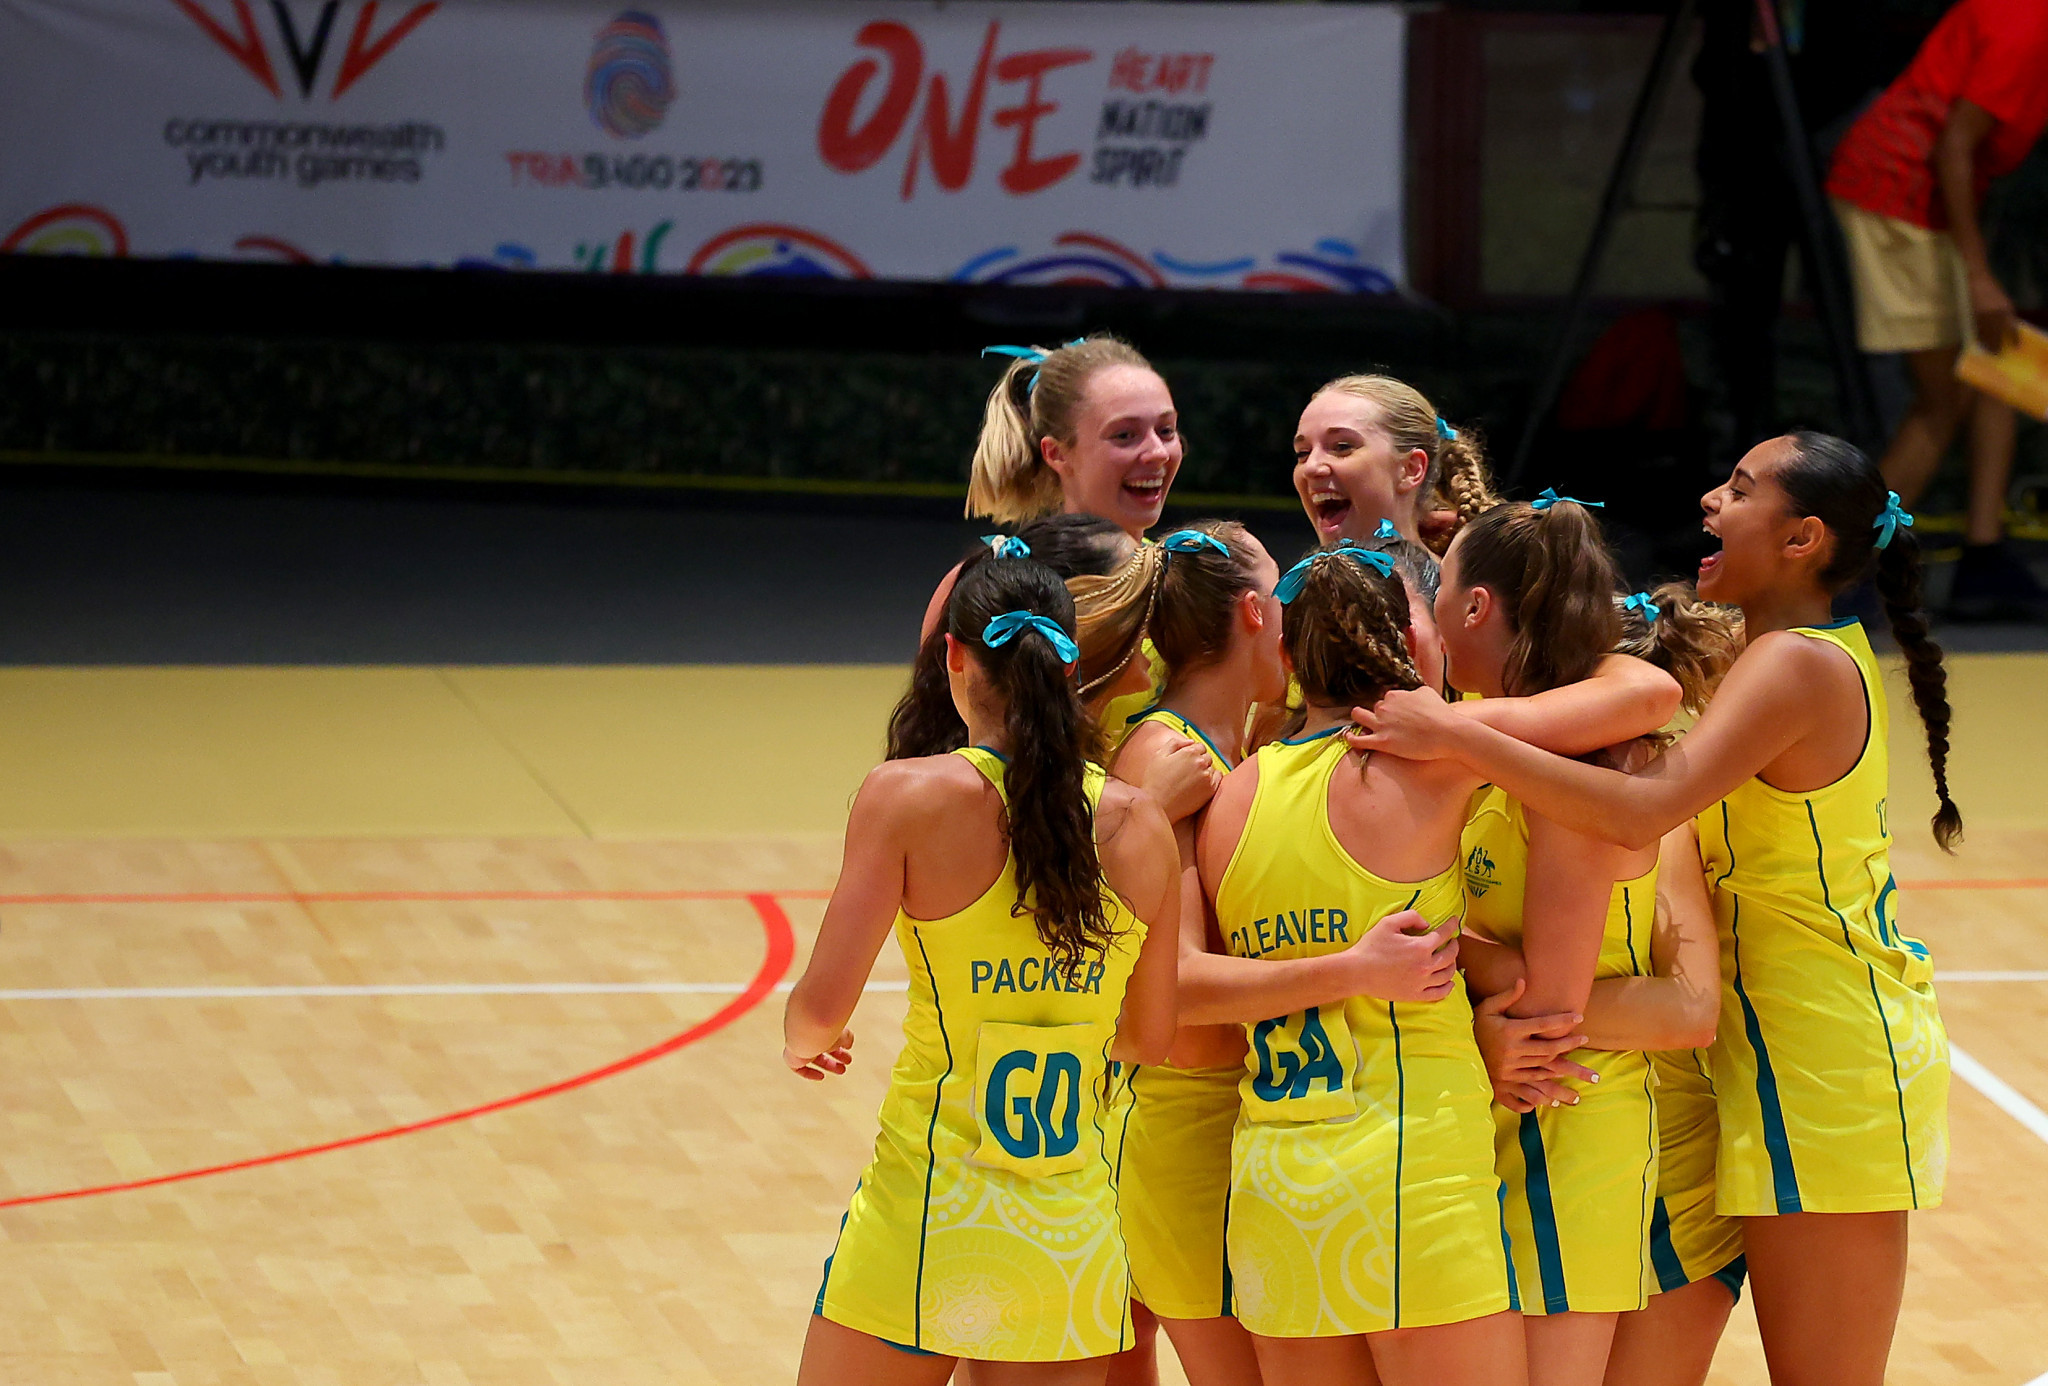 Australia are into the fast5 netball with four straight wins after beating England 44-25 in the semi-finals, and are set to play South Africa for gold  ©Getty Images